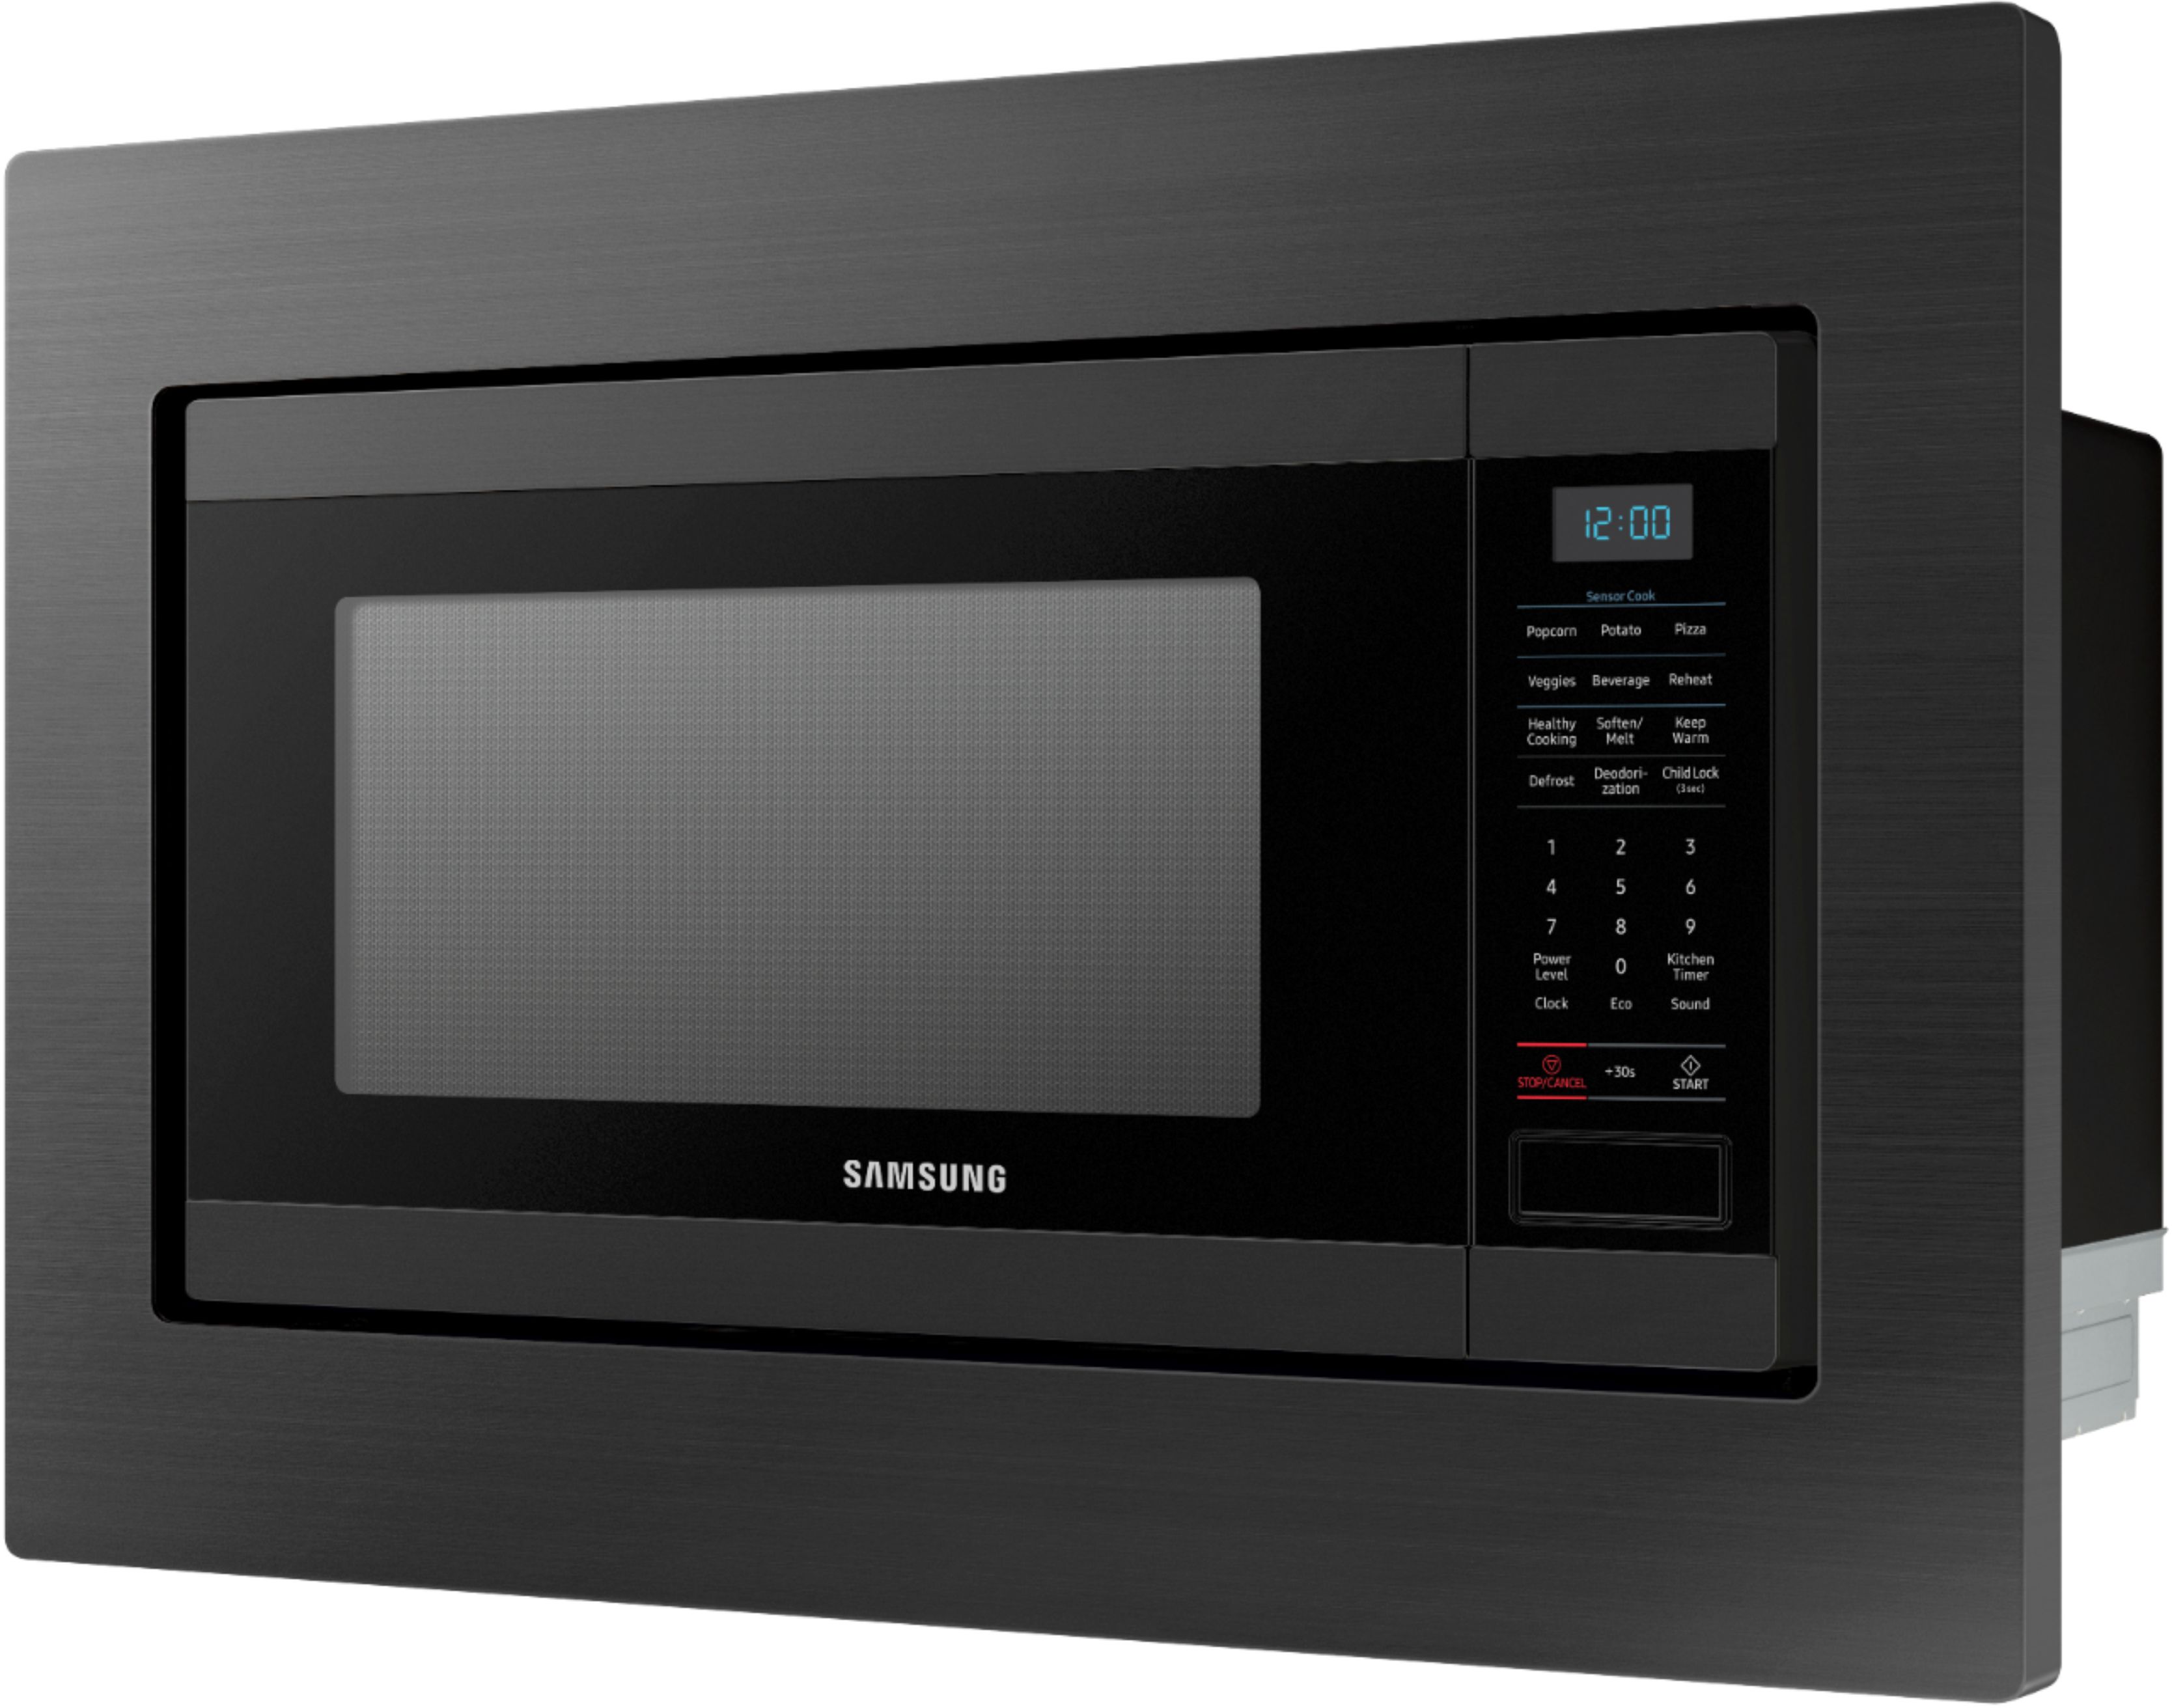 Angle View: Samsung - 30" Trim Kit for MS19M8020TG Microwave - Black Stainless Steel